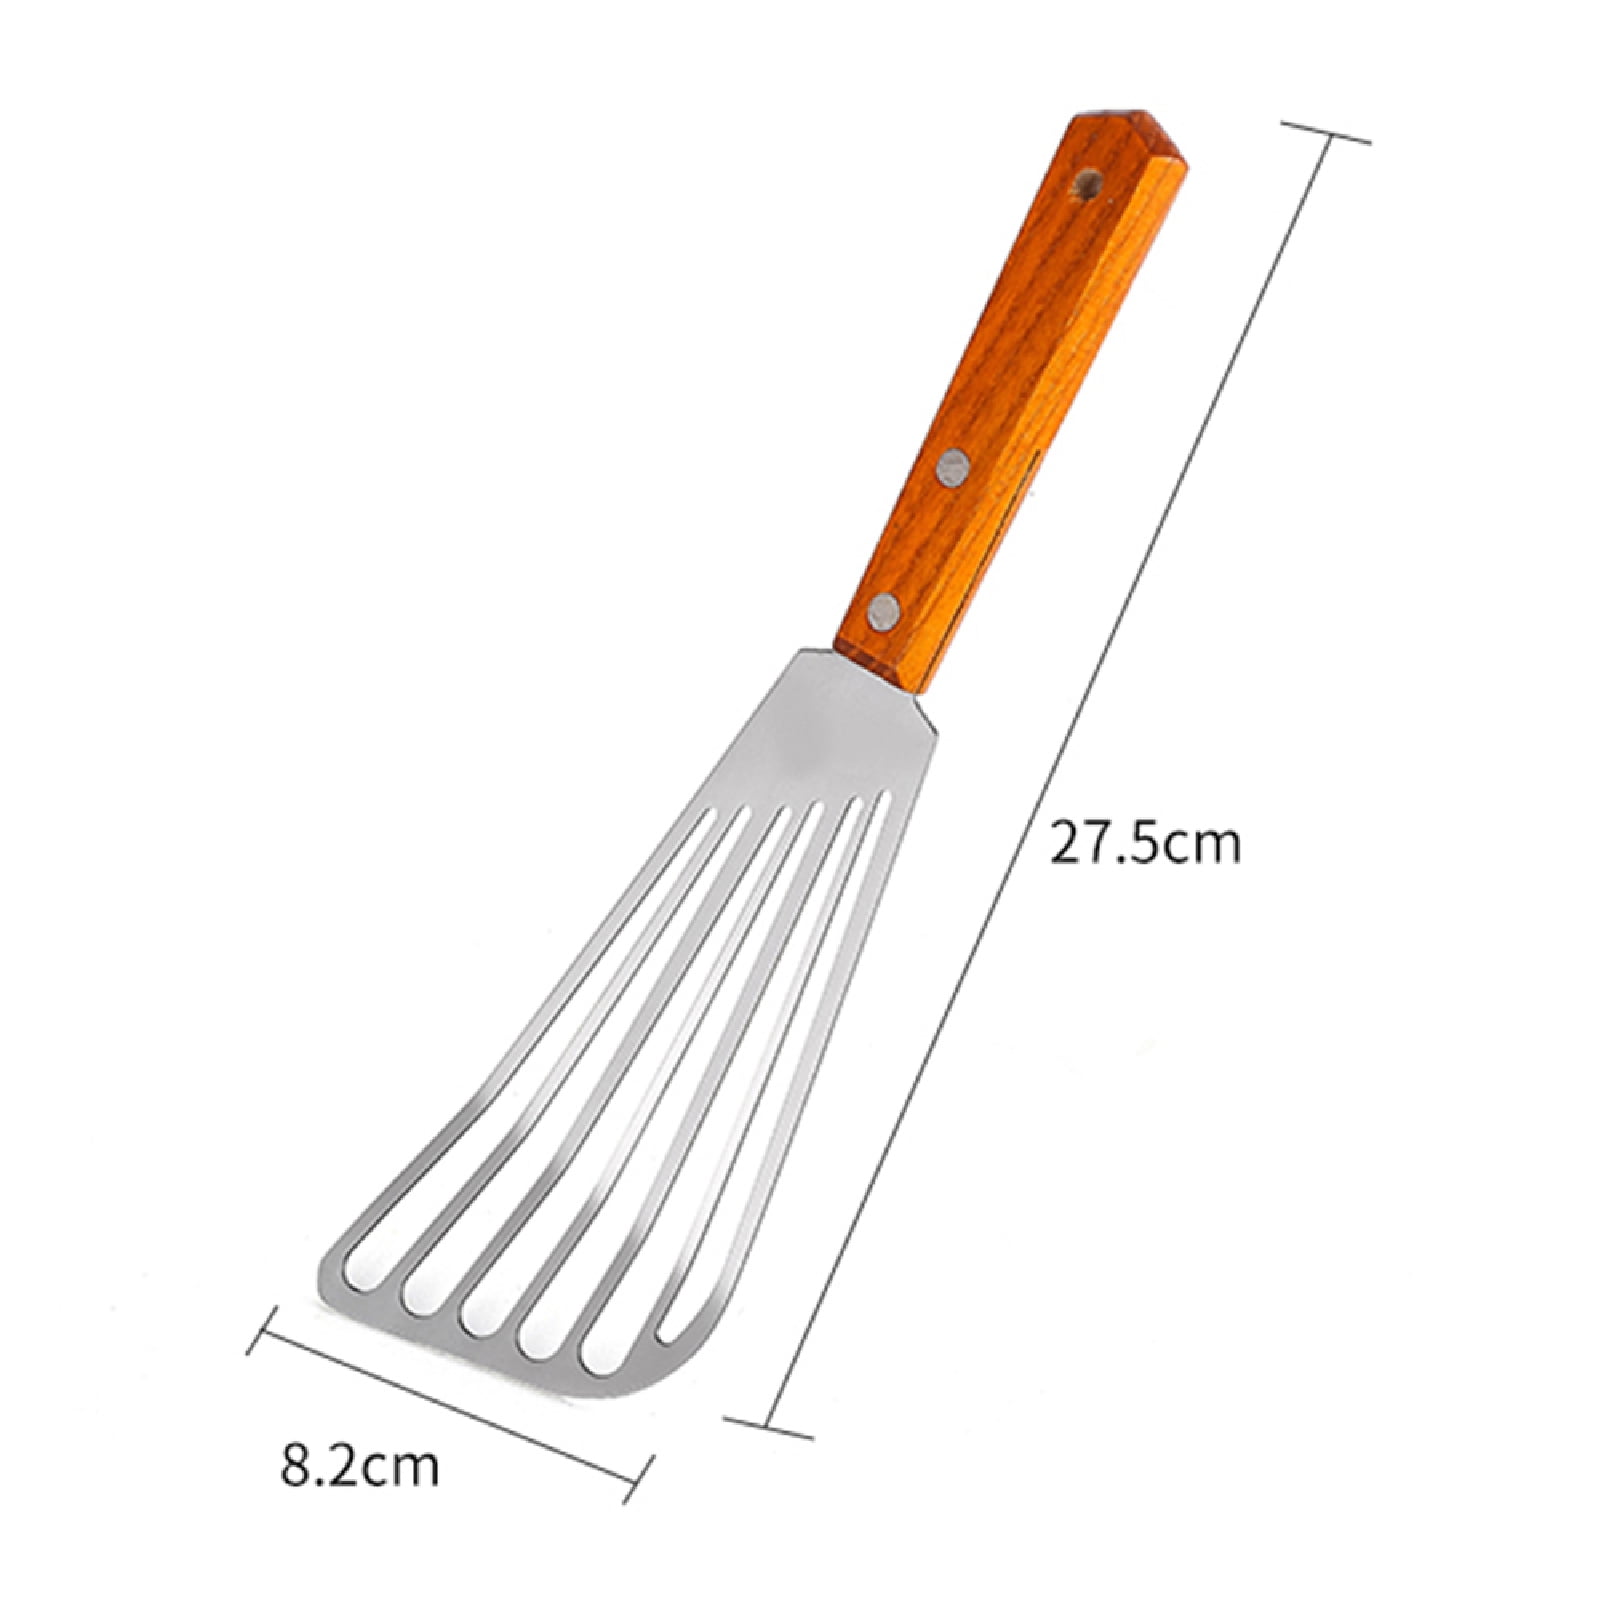 MSE SLOTTED SPATULA TURNER FLIPPER Stainless Steel 18/8 KITCHEN UTENSIL  COOKING